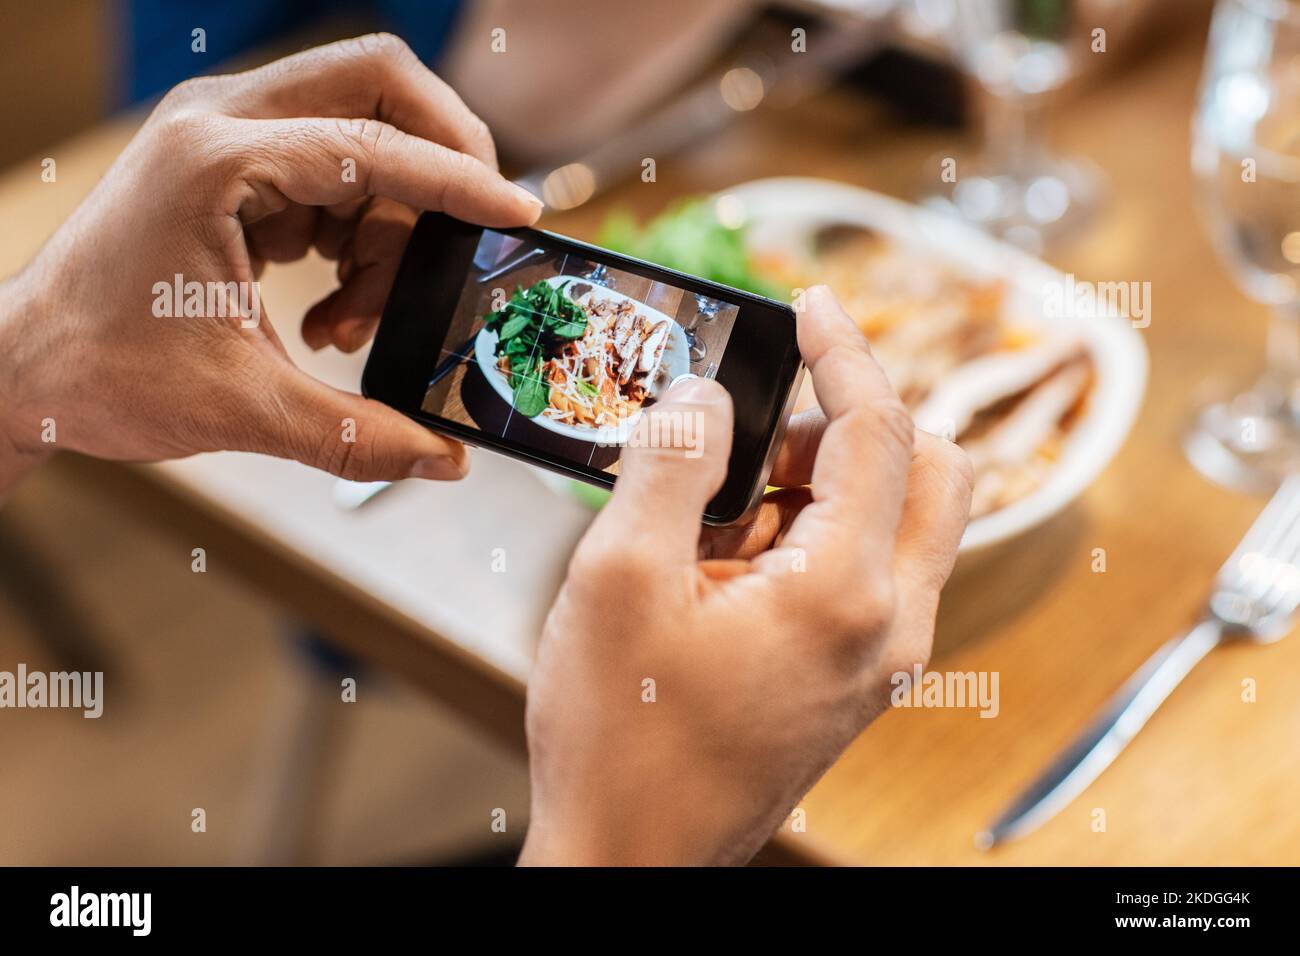 man with phone photographing food at restaurant Stock Photo